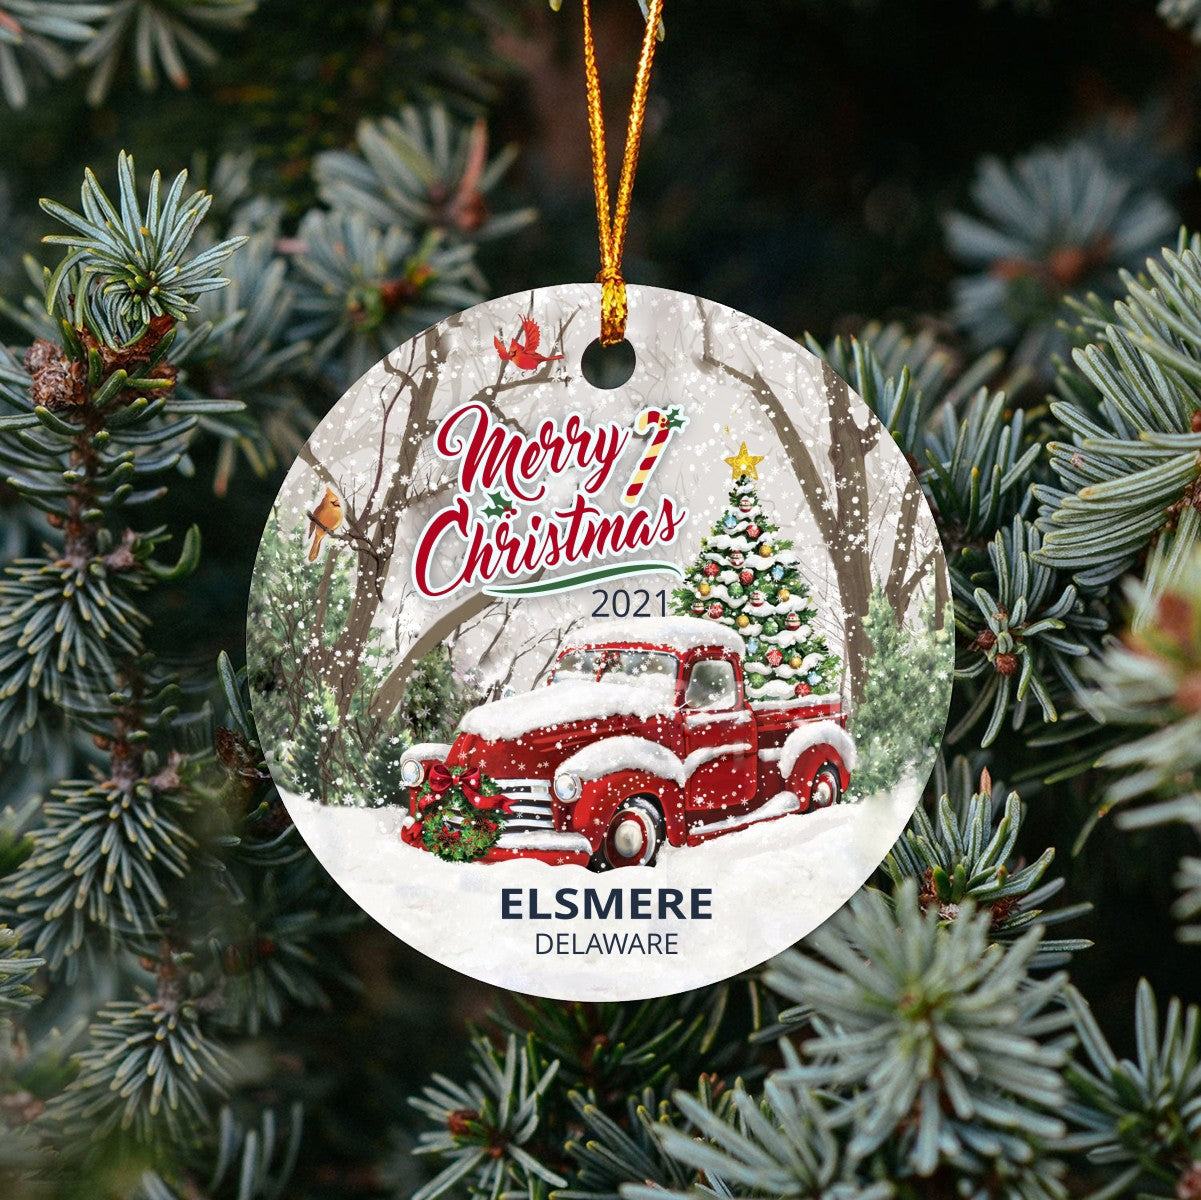 Christmas Tree Ornaments Elsmere - Ornament With Name City, State Elsmere Delaware DE Ornament - Red Truck Xmas Ornaments 3'' Plastic Gift For Family, Friend And Housewarming